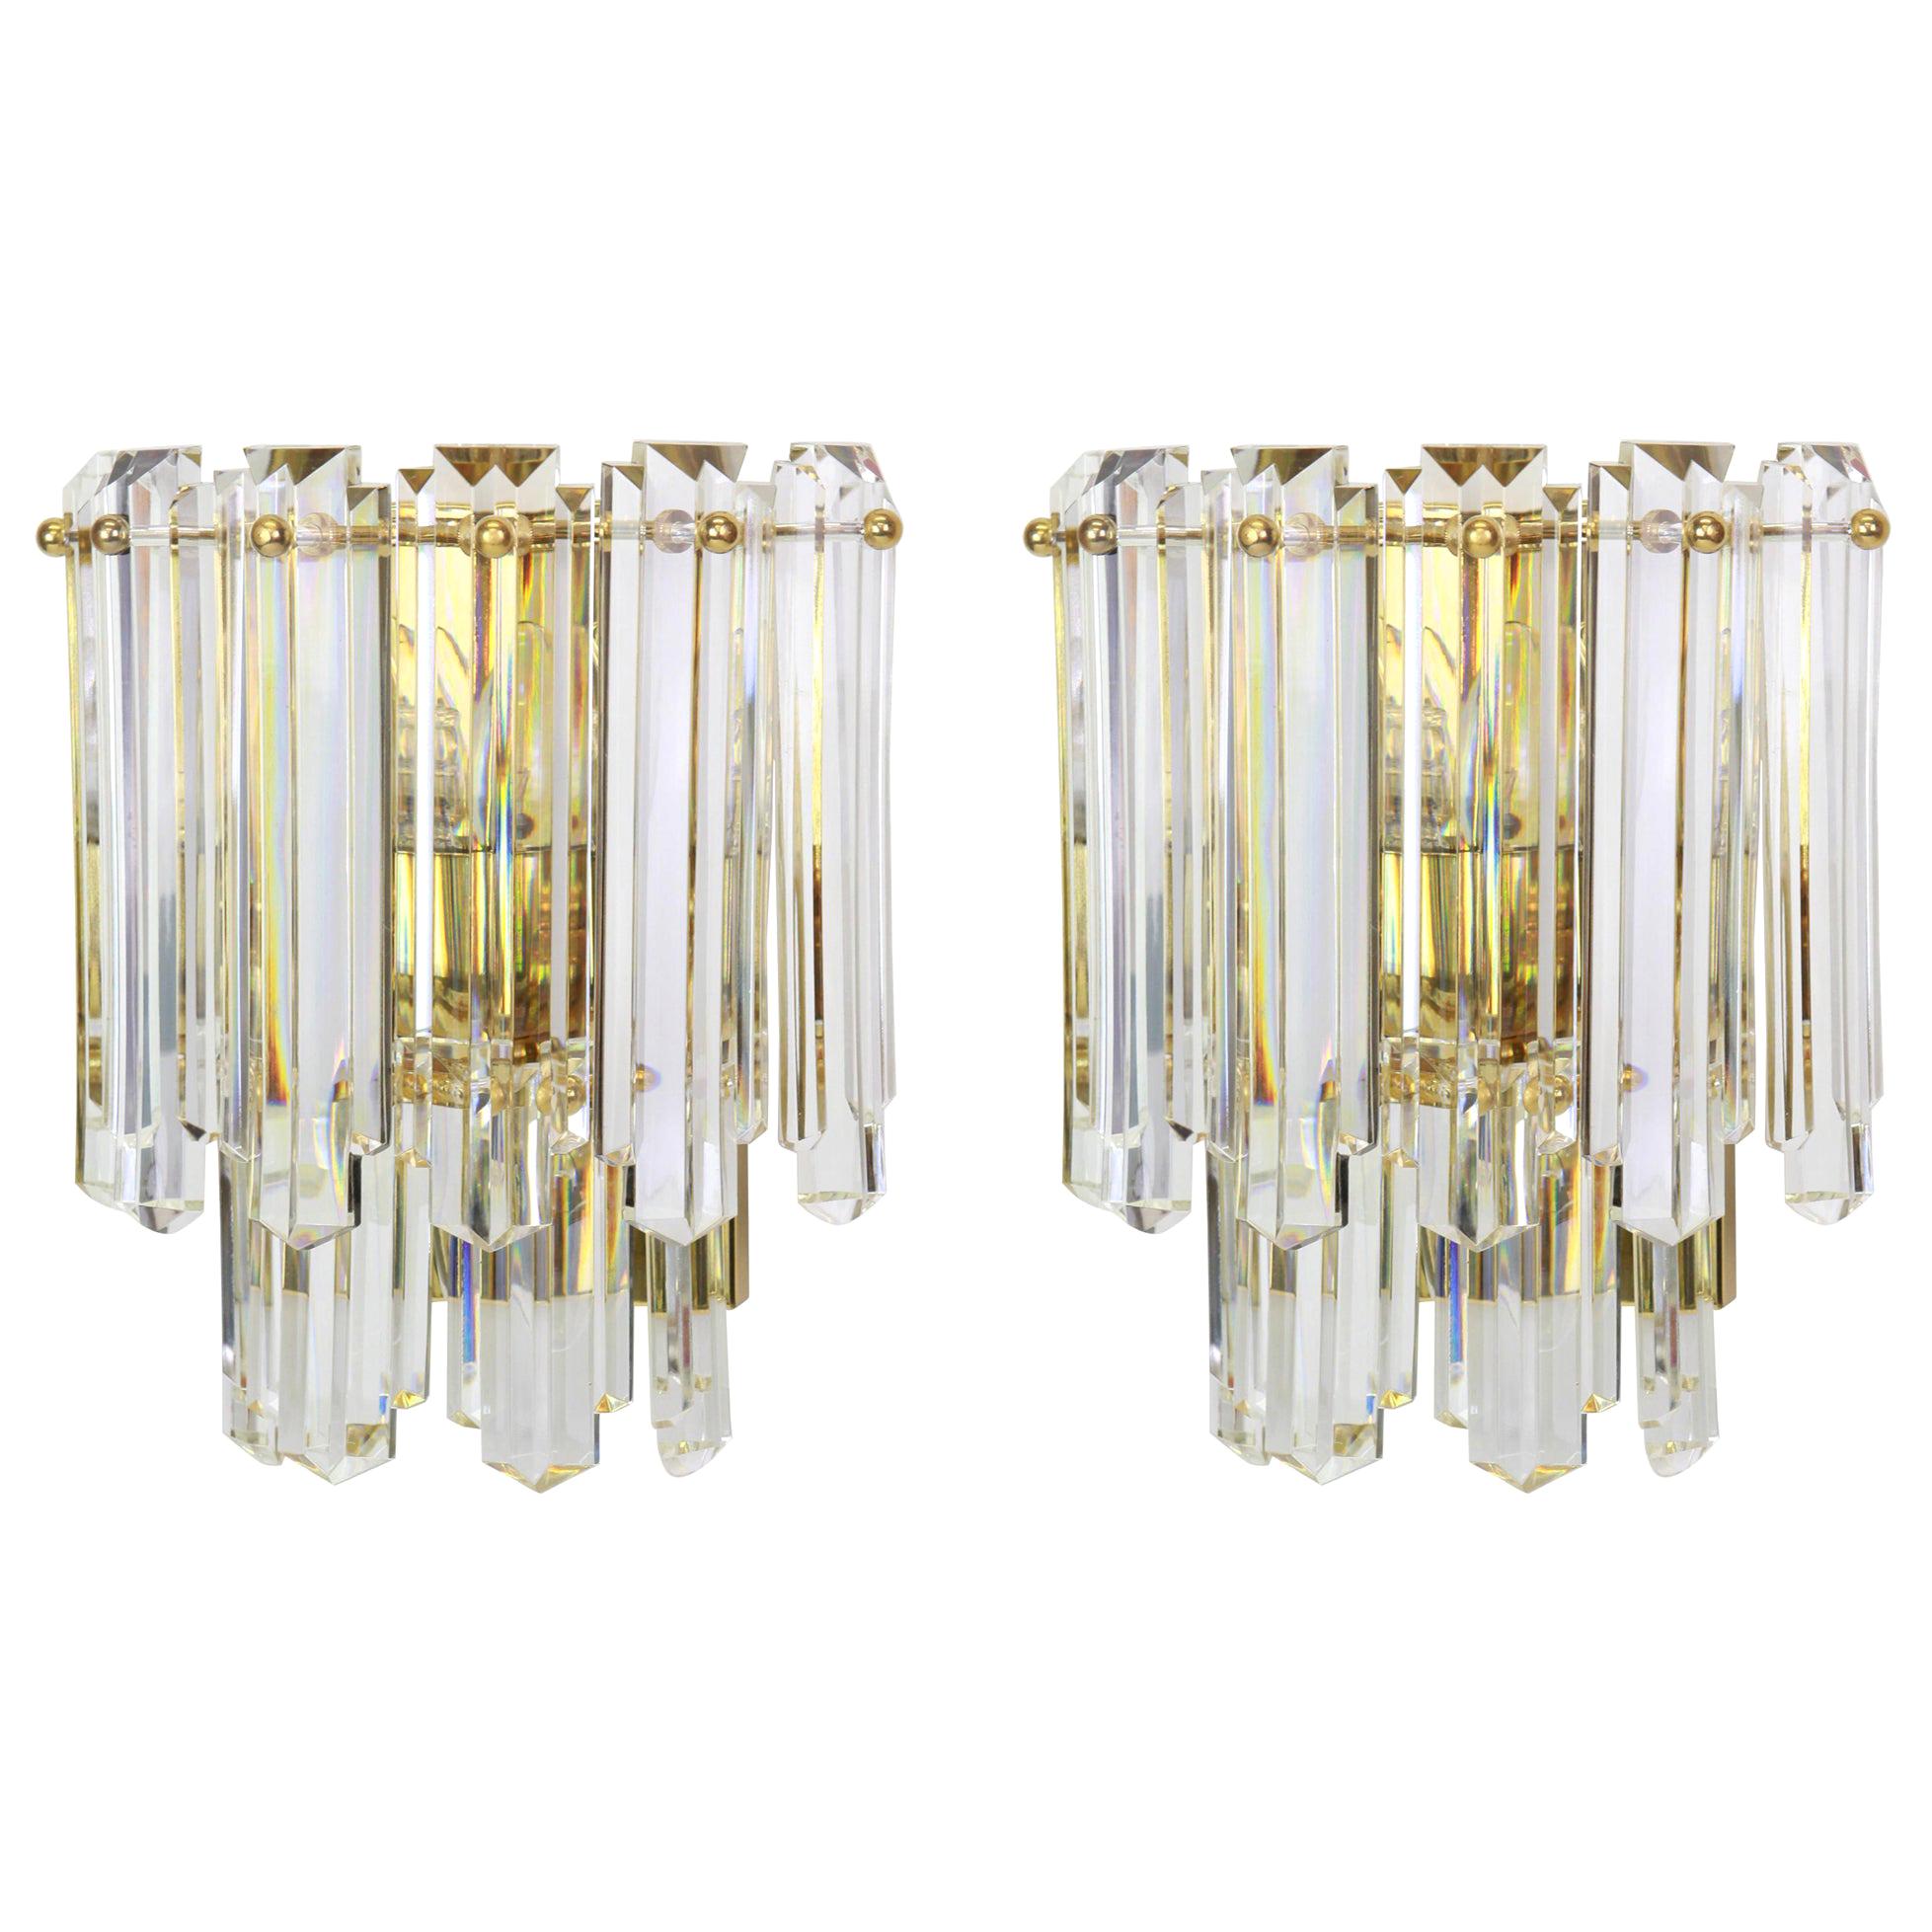 Pair of Large Kalmar Crystal Glass Sconces Wall Lights, Austria, 1970s For Sale